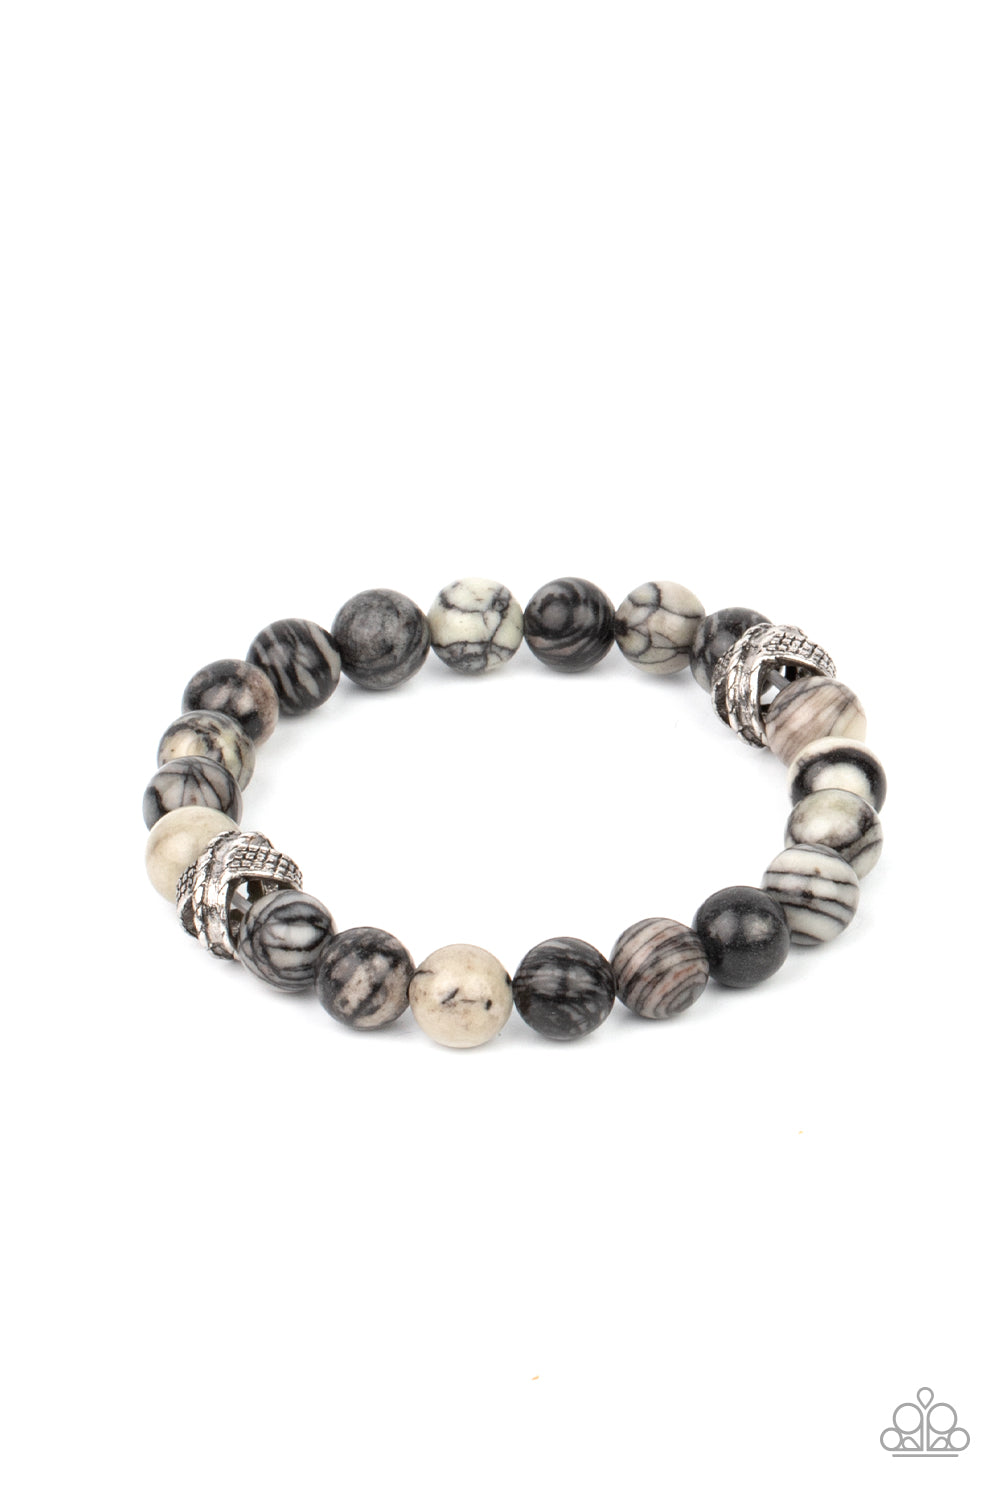 Zen Commandments - Black Urban Bracelets infused with textured silver accents, an earthy collection of swirling black and white stones are threaded along a stretchy band around the wrist for a seasonal fashion.  Sold as one individual bracelet.  Paparazzi Jewelry is lead and nickel free so it's perfect for sensitive skin too!